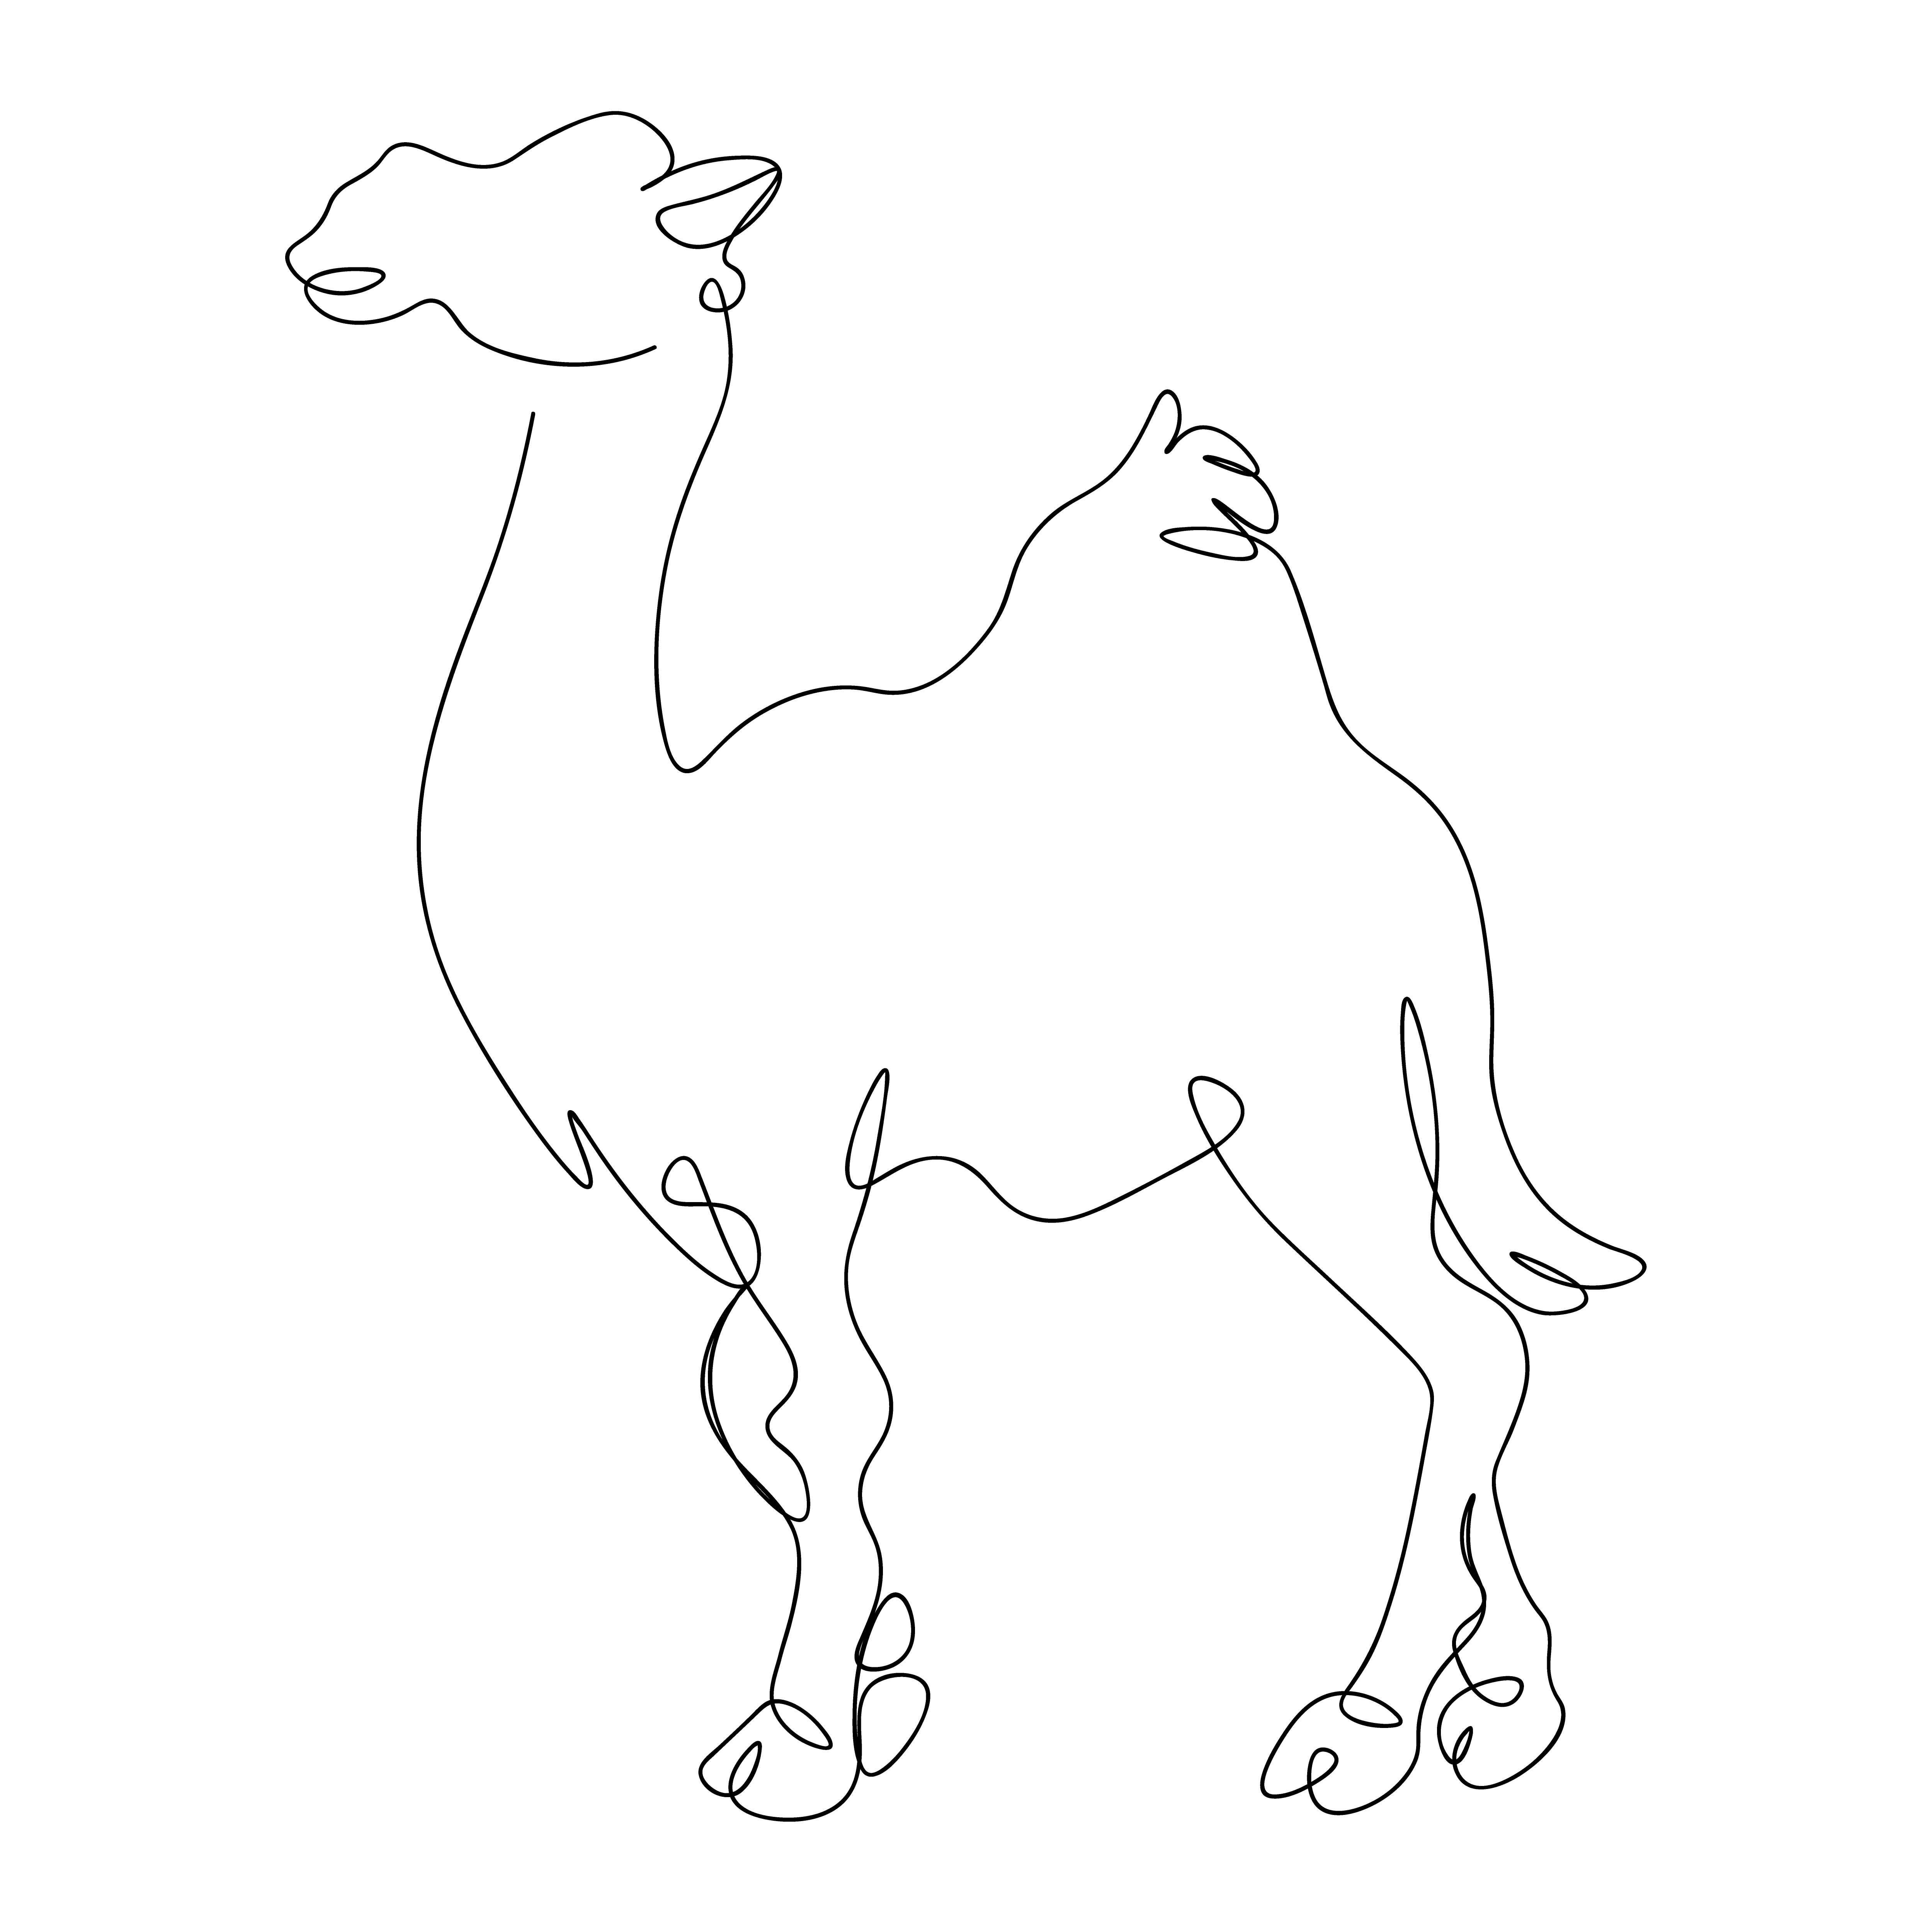 Camel Single Line Art Drawing For Personal Or Commercial Use cover image.